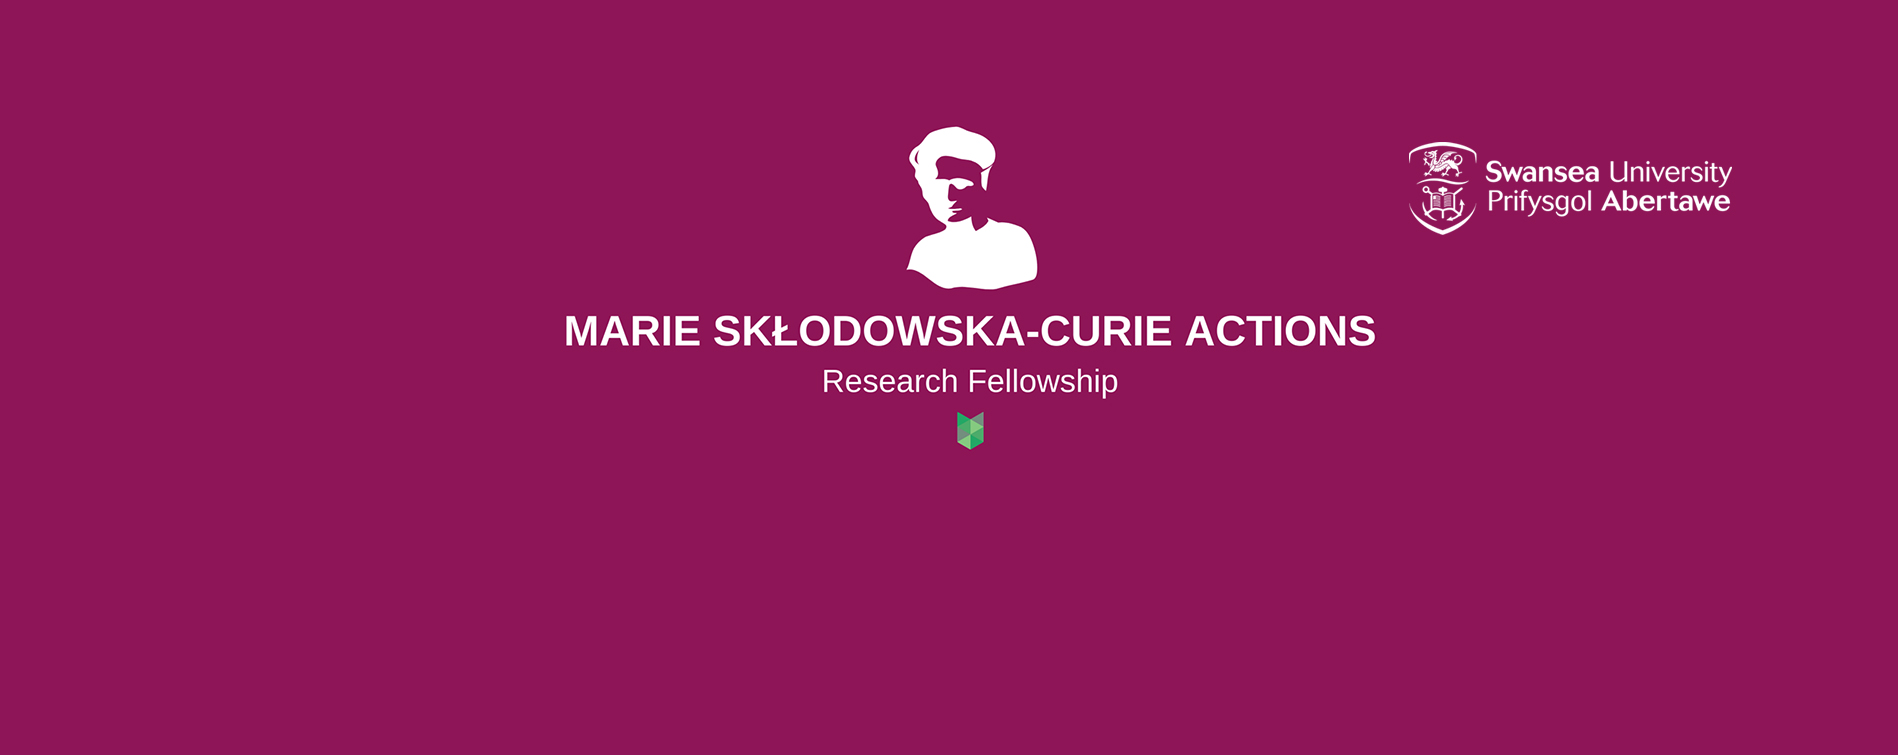 marie curie graphic with Swansea university logo